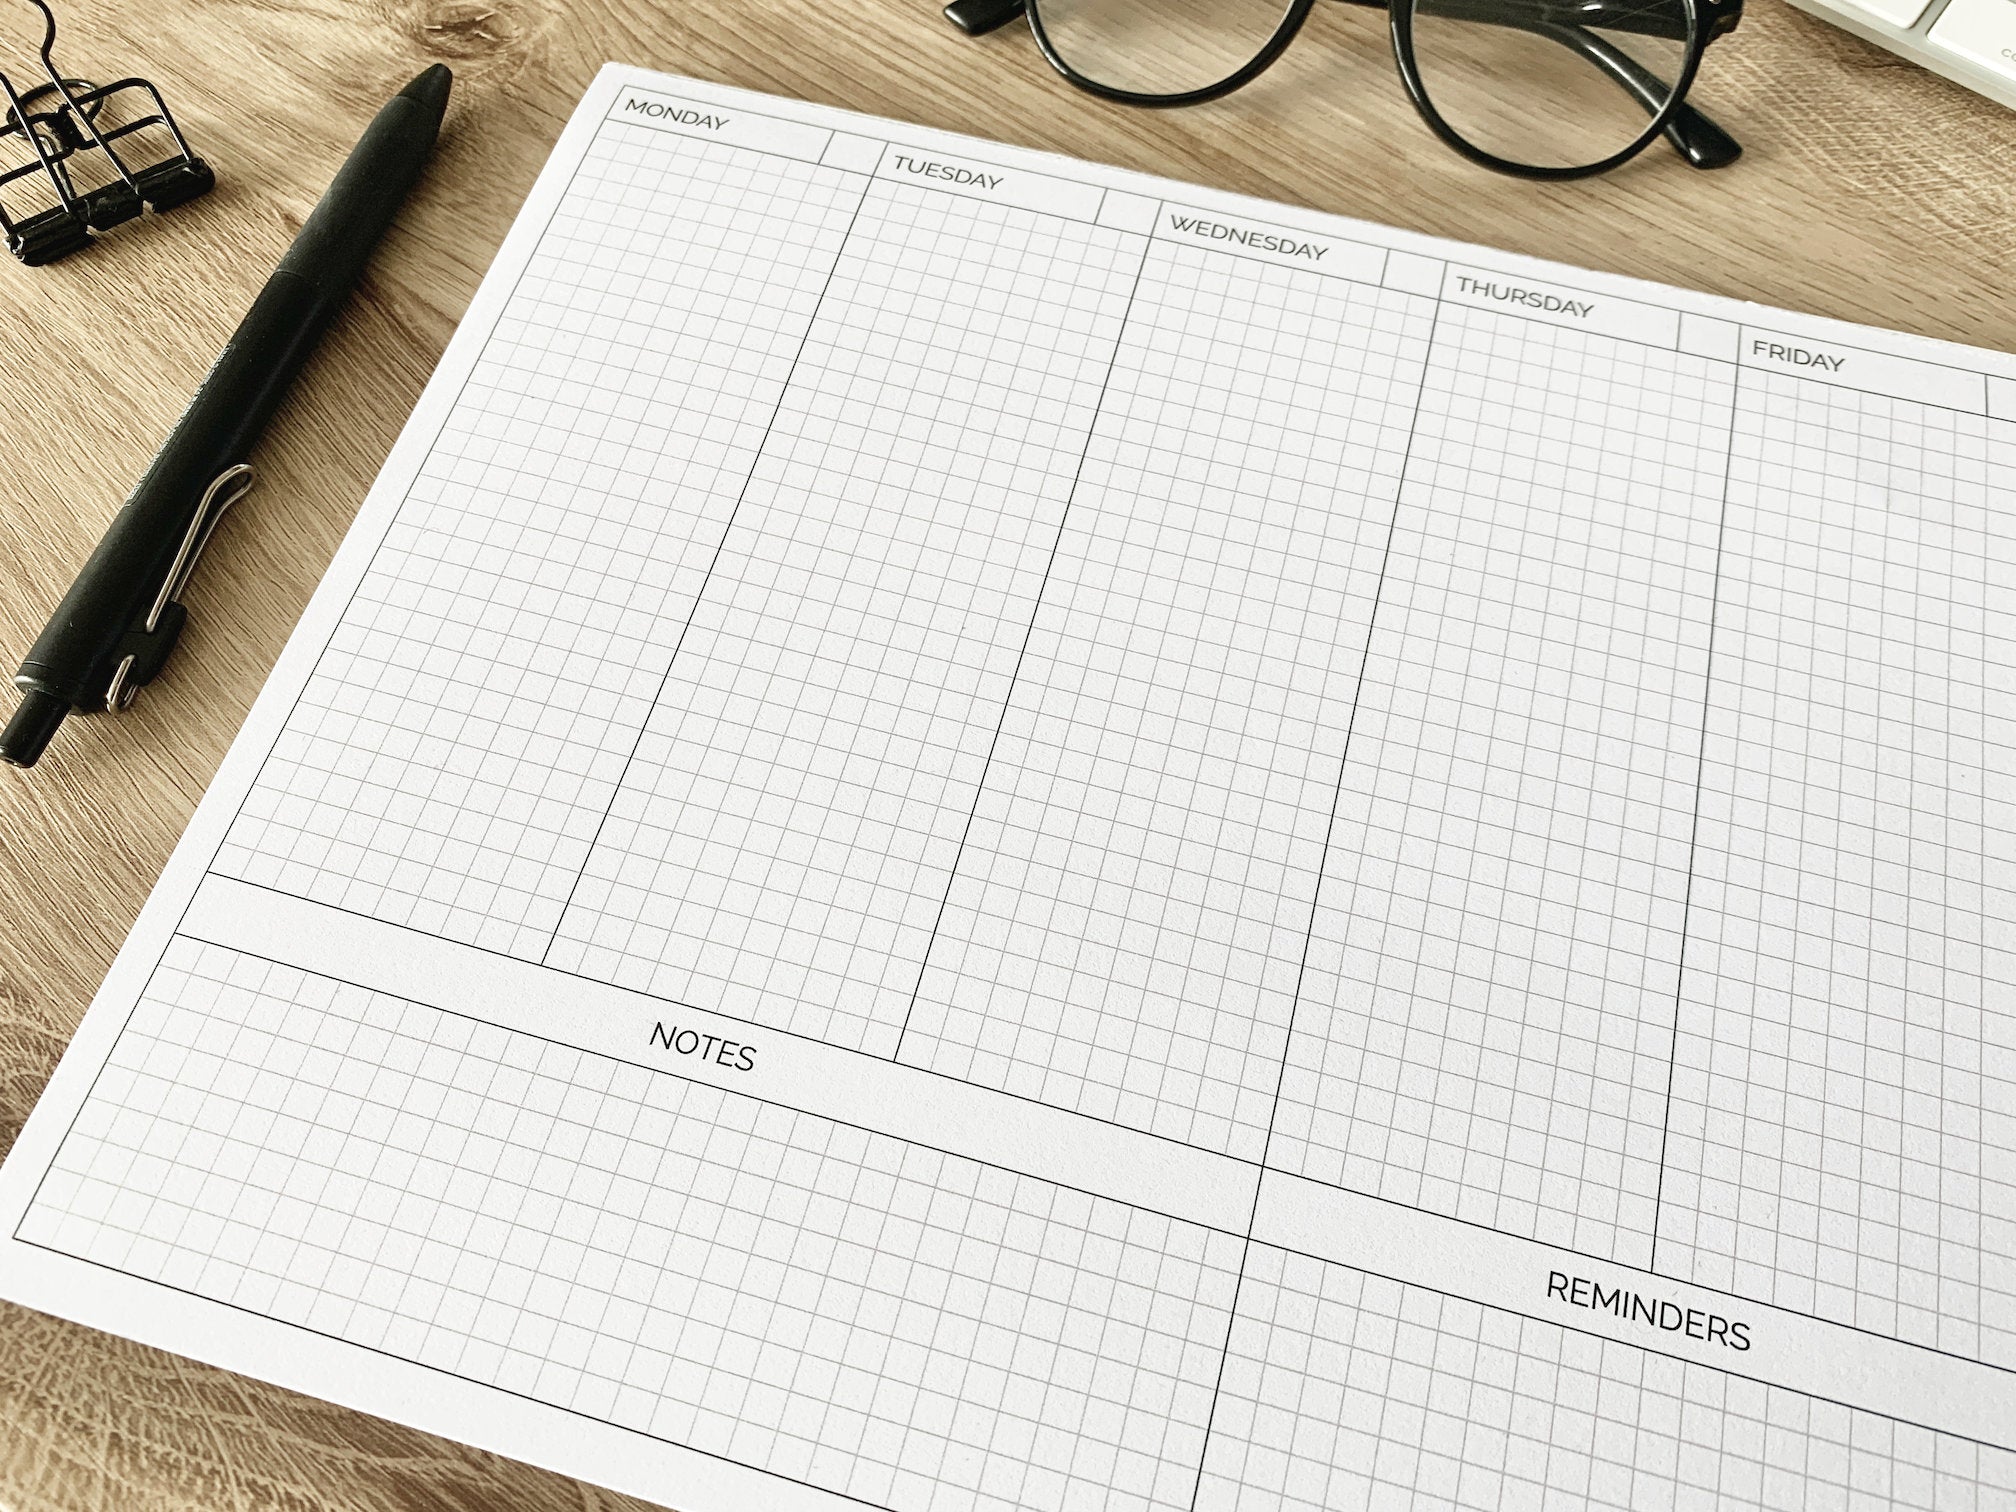 Essential Work or Study Pad - Tasks, Notes & Reminders. Organise Yourself with this A4 Desk Pad - Tear Off Sheets